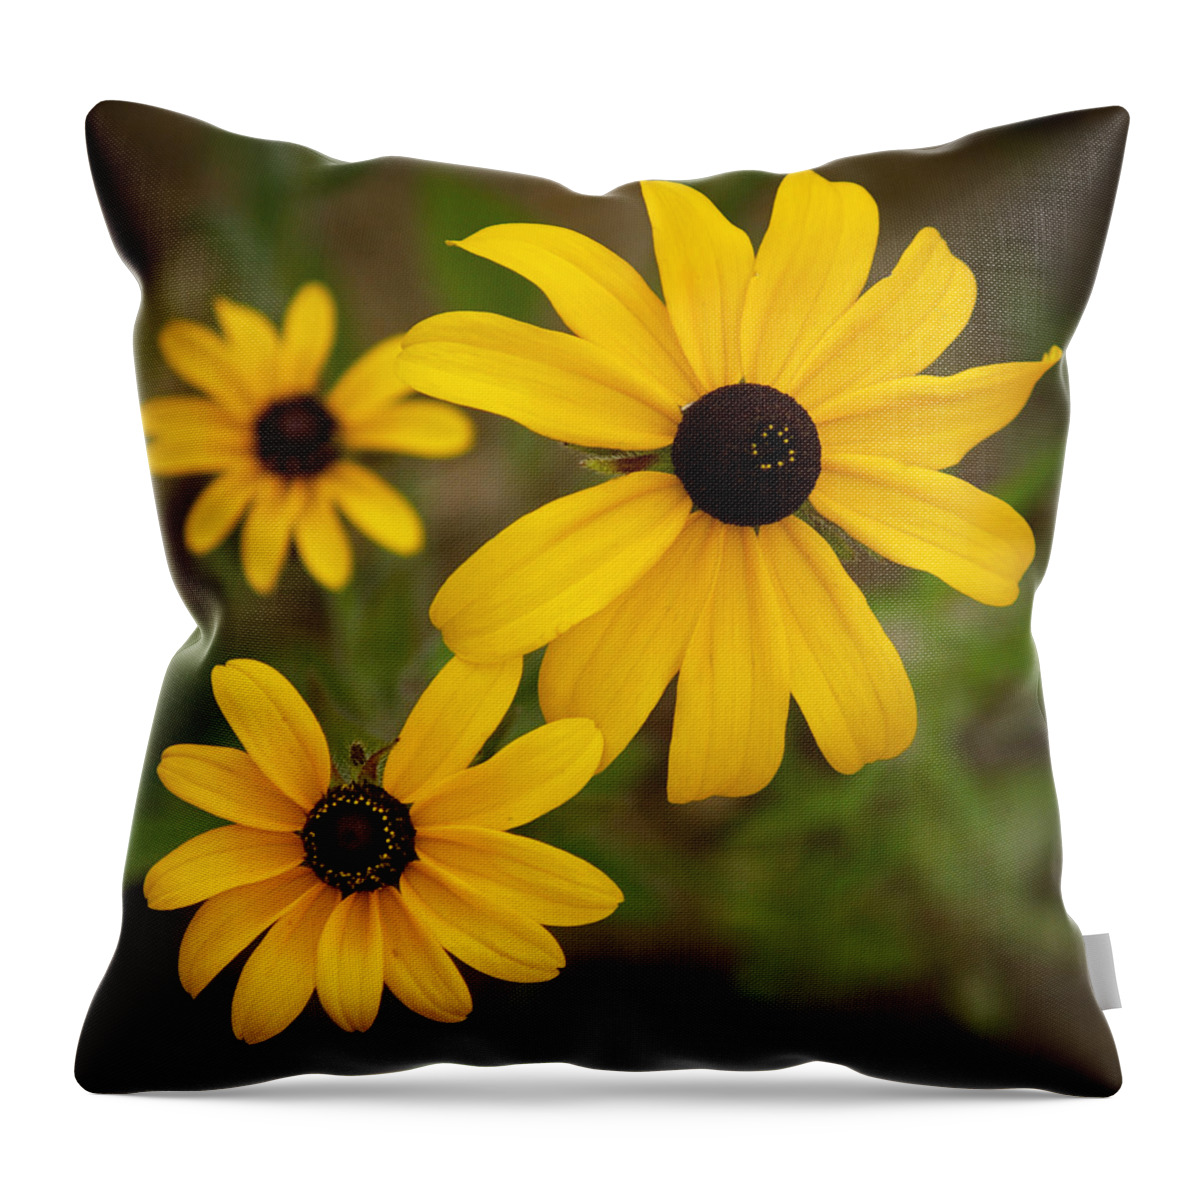 Flowers Throw Pillow featuring the photograph Lovely Black Eyed Susans by Dorothy Lee